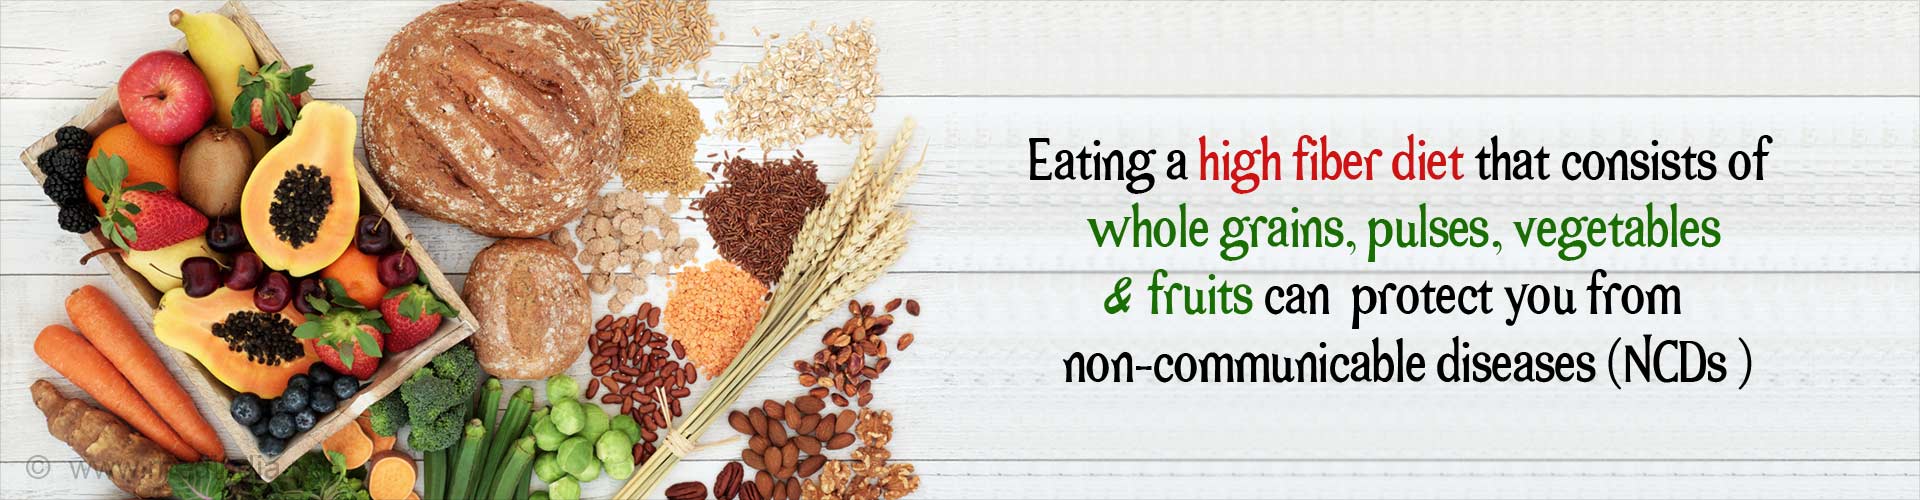 Eating a high fiber diet that consists of whole grains, pulses, vegetables and fruits can protect you from non-communicable diseases (NCDs).